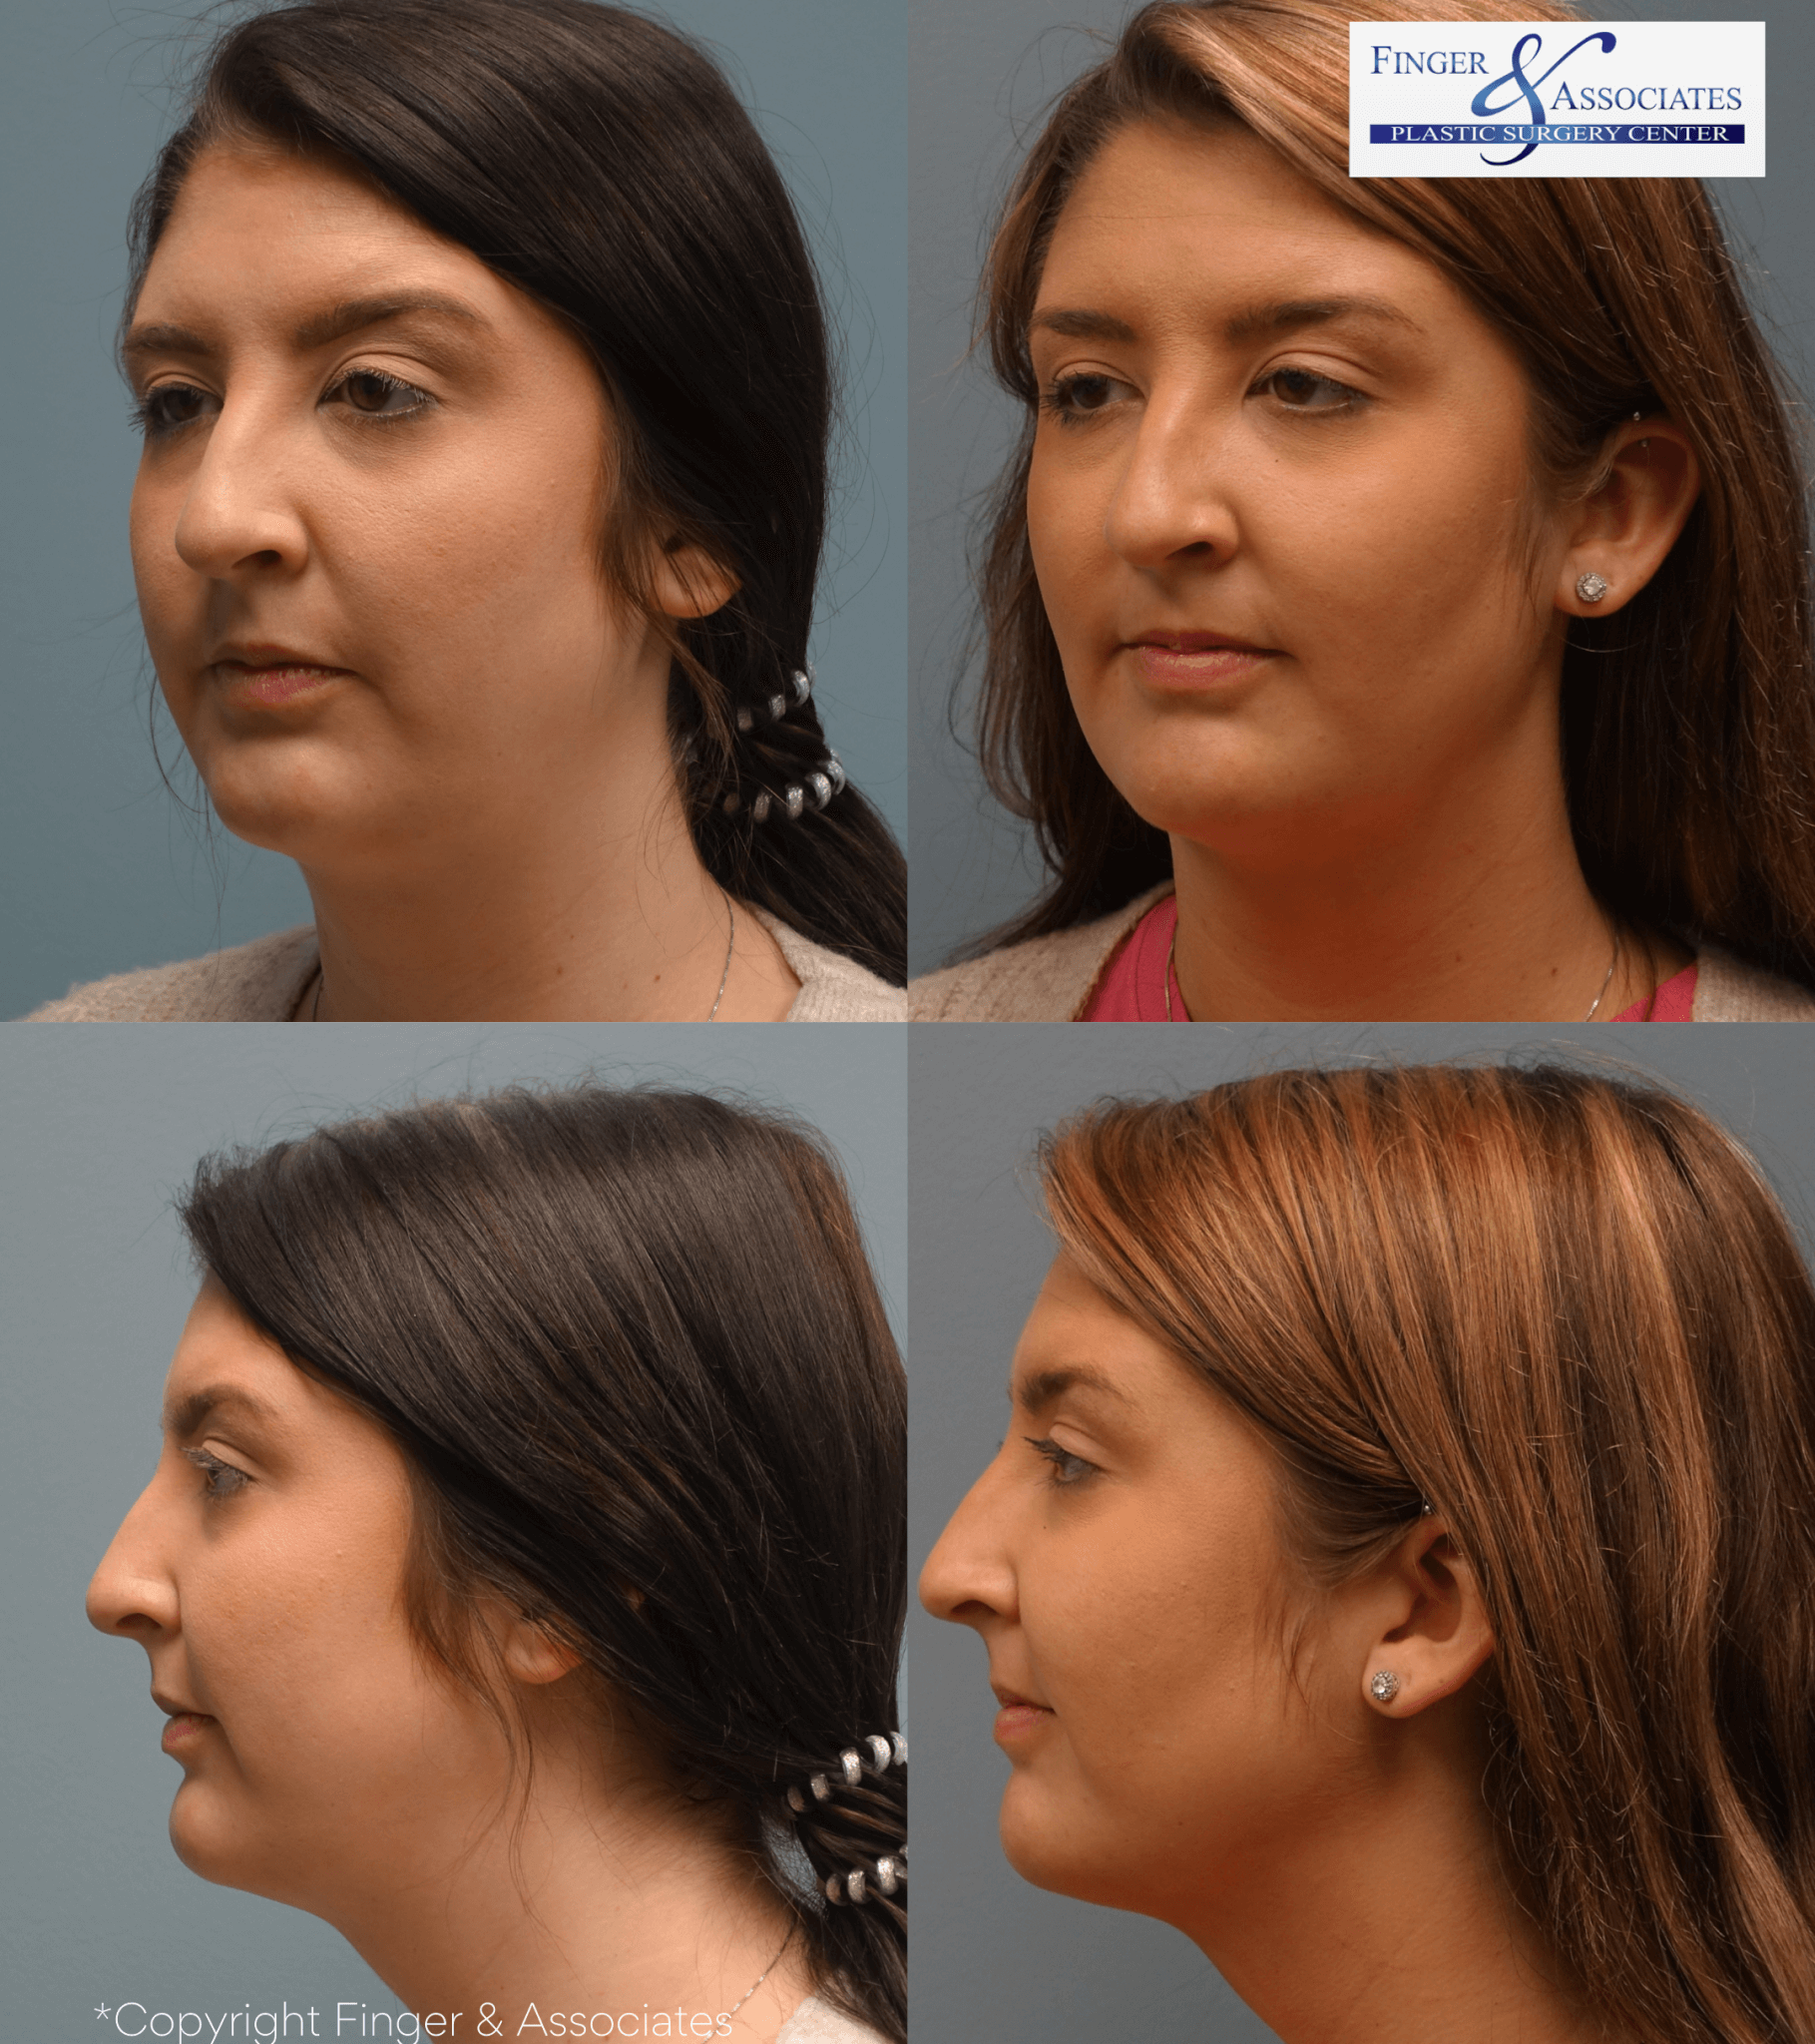 Before and after 6-month of liposuction of the lower face and neck